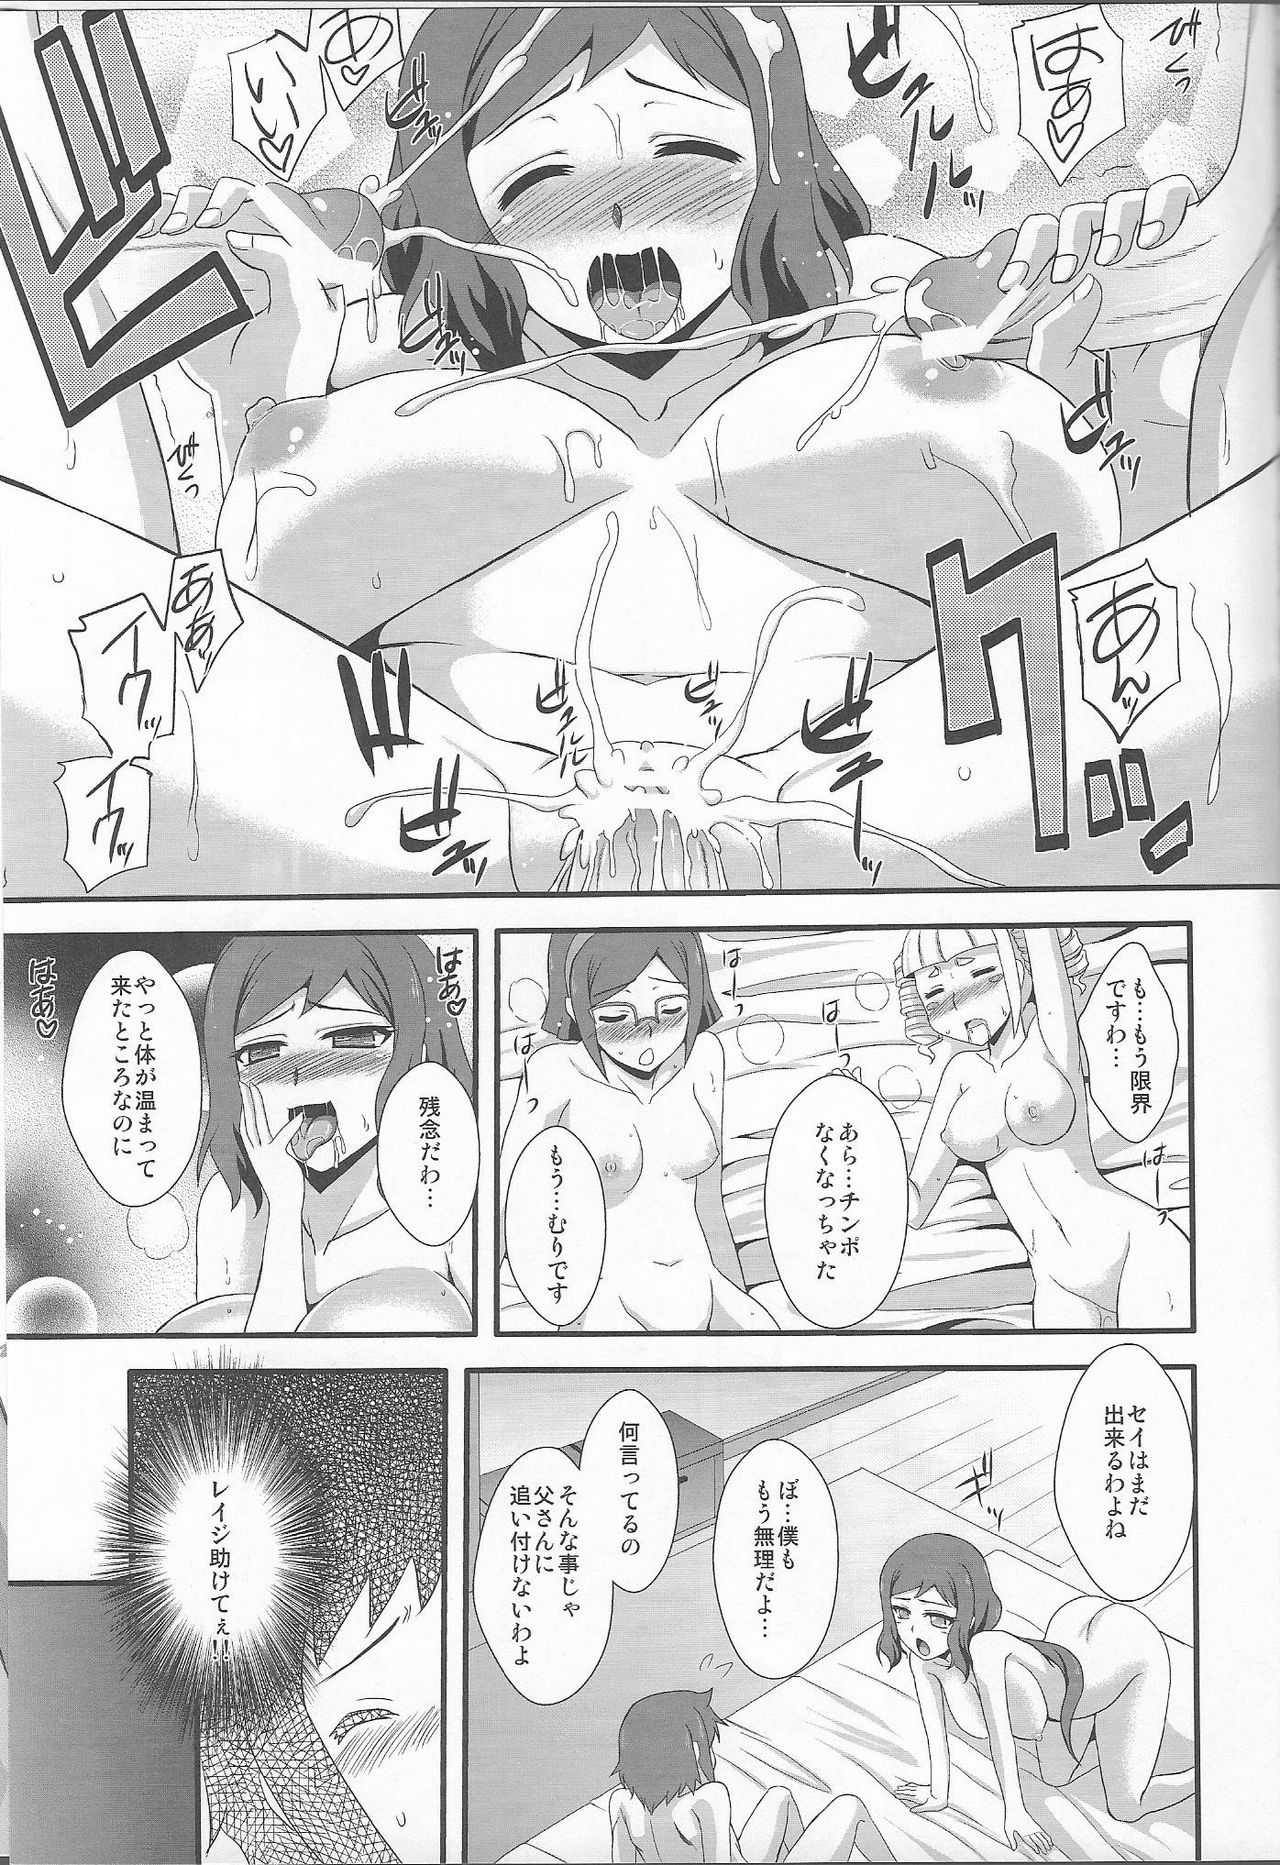 (CT23) [Take Out (Zeros)] SEX FIGHTERS (Gundam Build Fighters) page 29 full